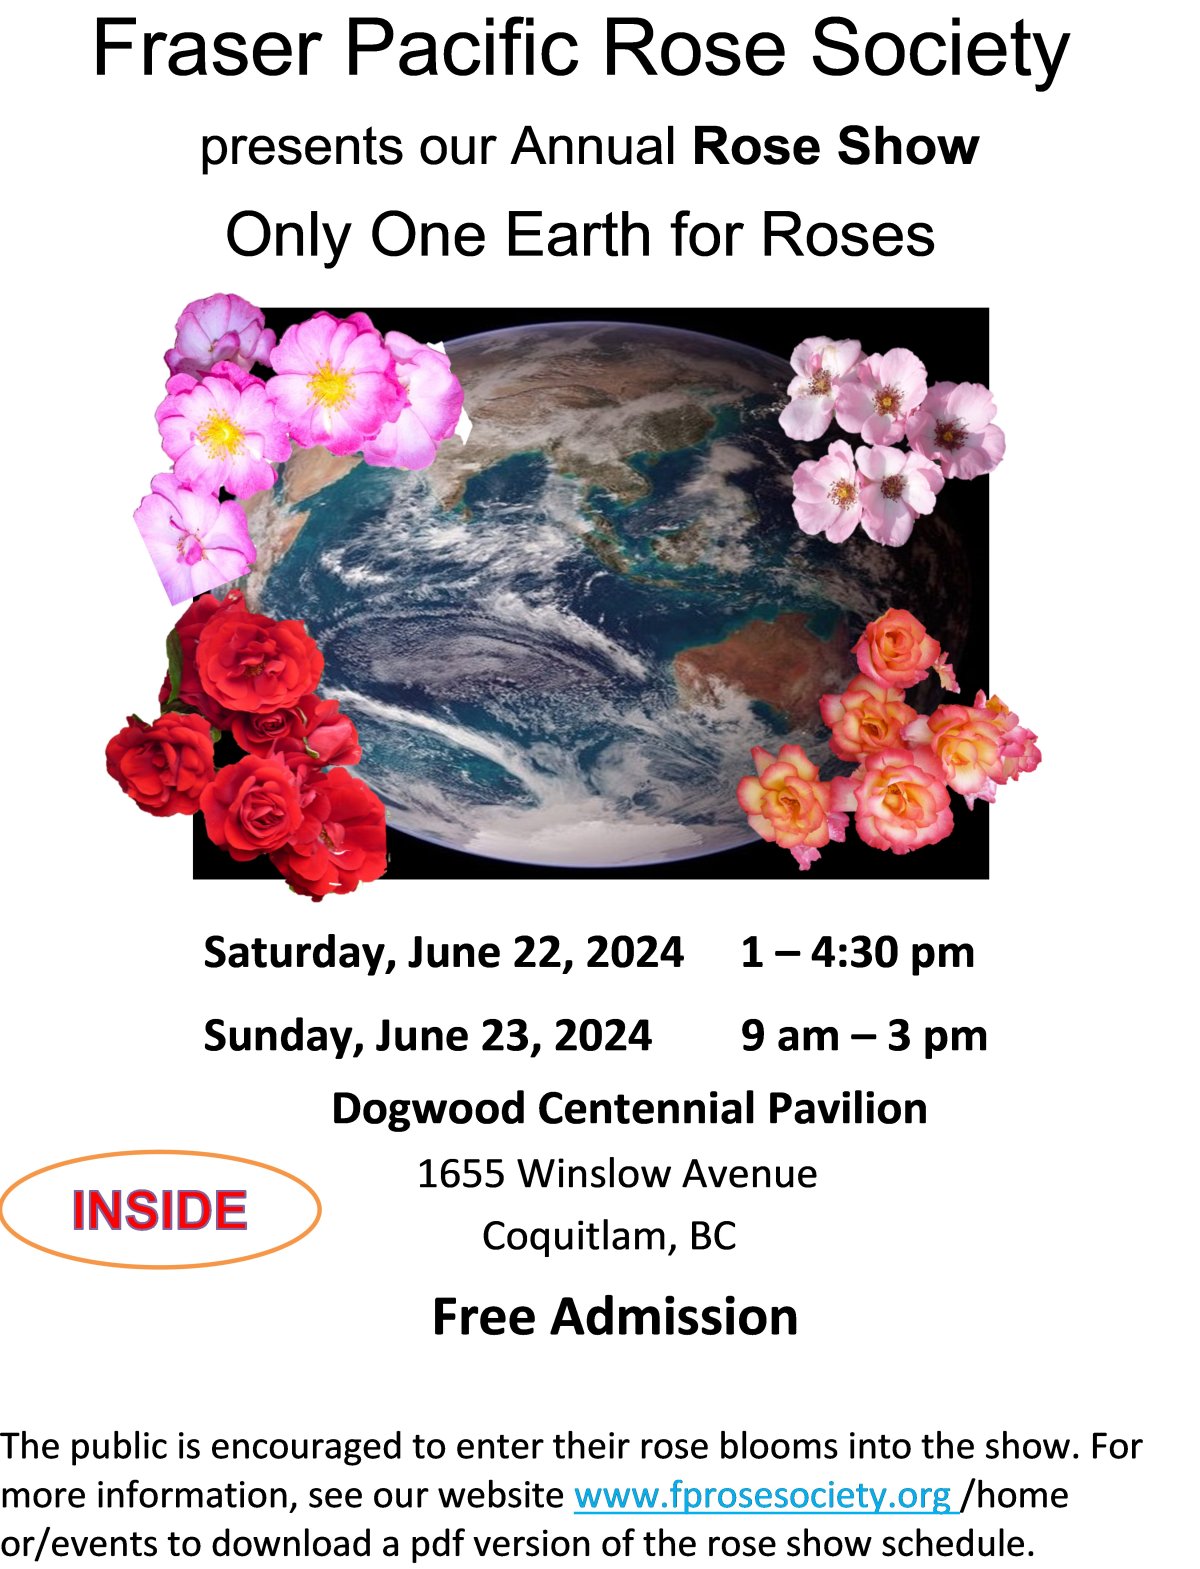 Fraser Pacific Rose Society presents our Annual Rose Show - image